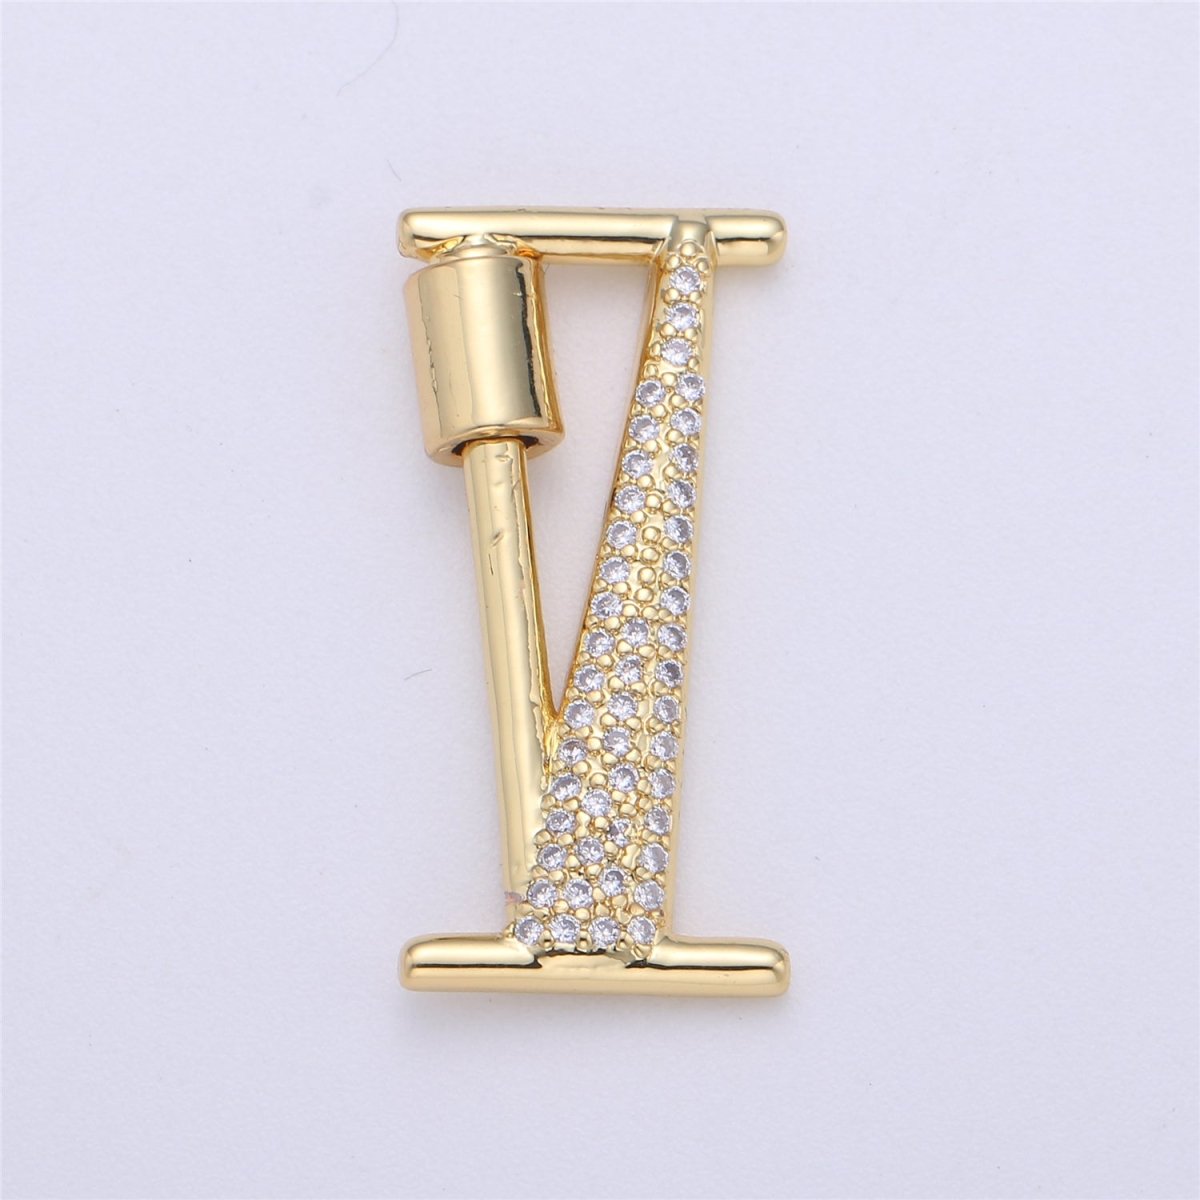 24K Gold-Plated Letter "I" Carabiner with Pave Zirconia Rhinestones, Circle Screw Clasp - DLUXCA